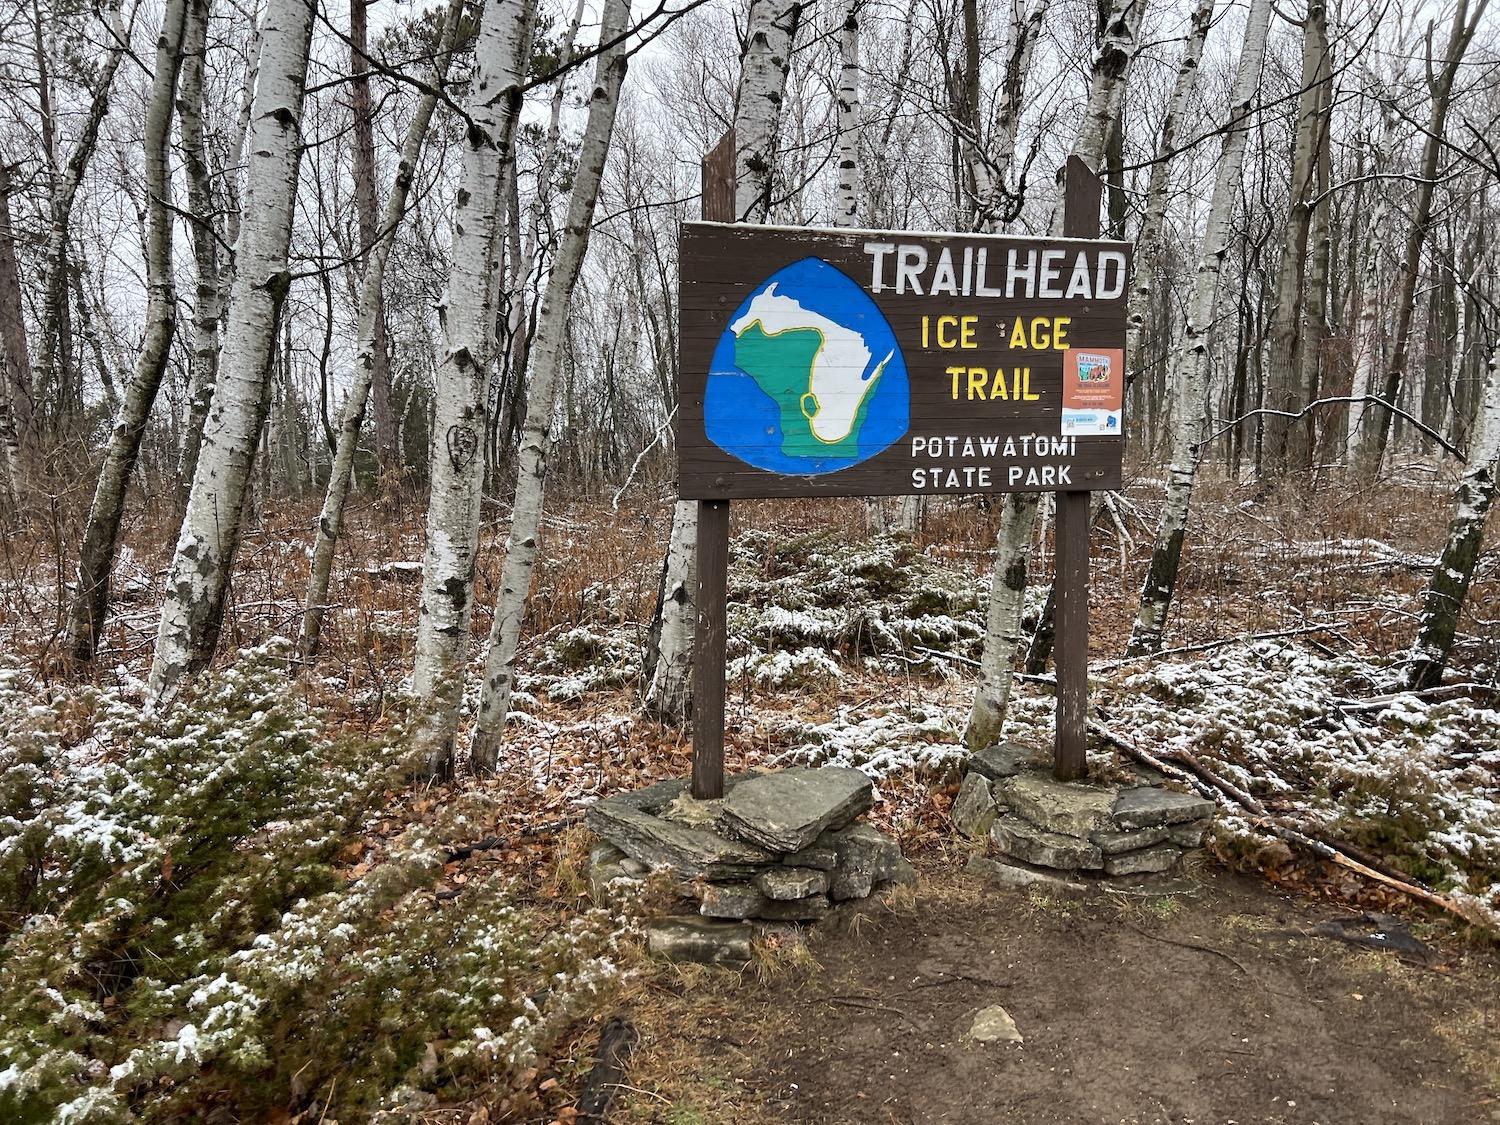 Near the eastern terminus of Ice Age National Scenic Trail is this trailhead sign.